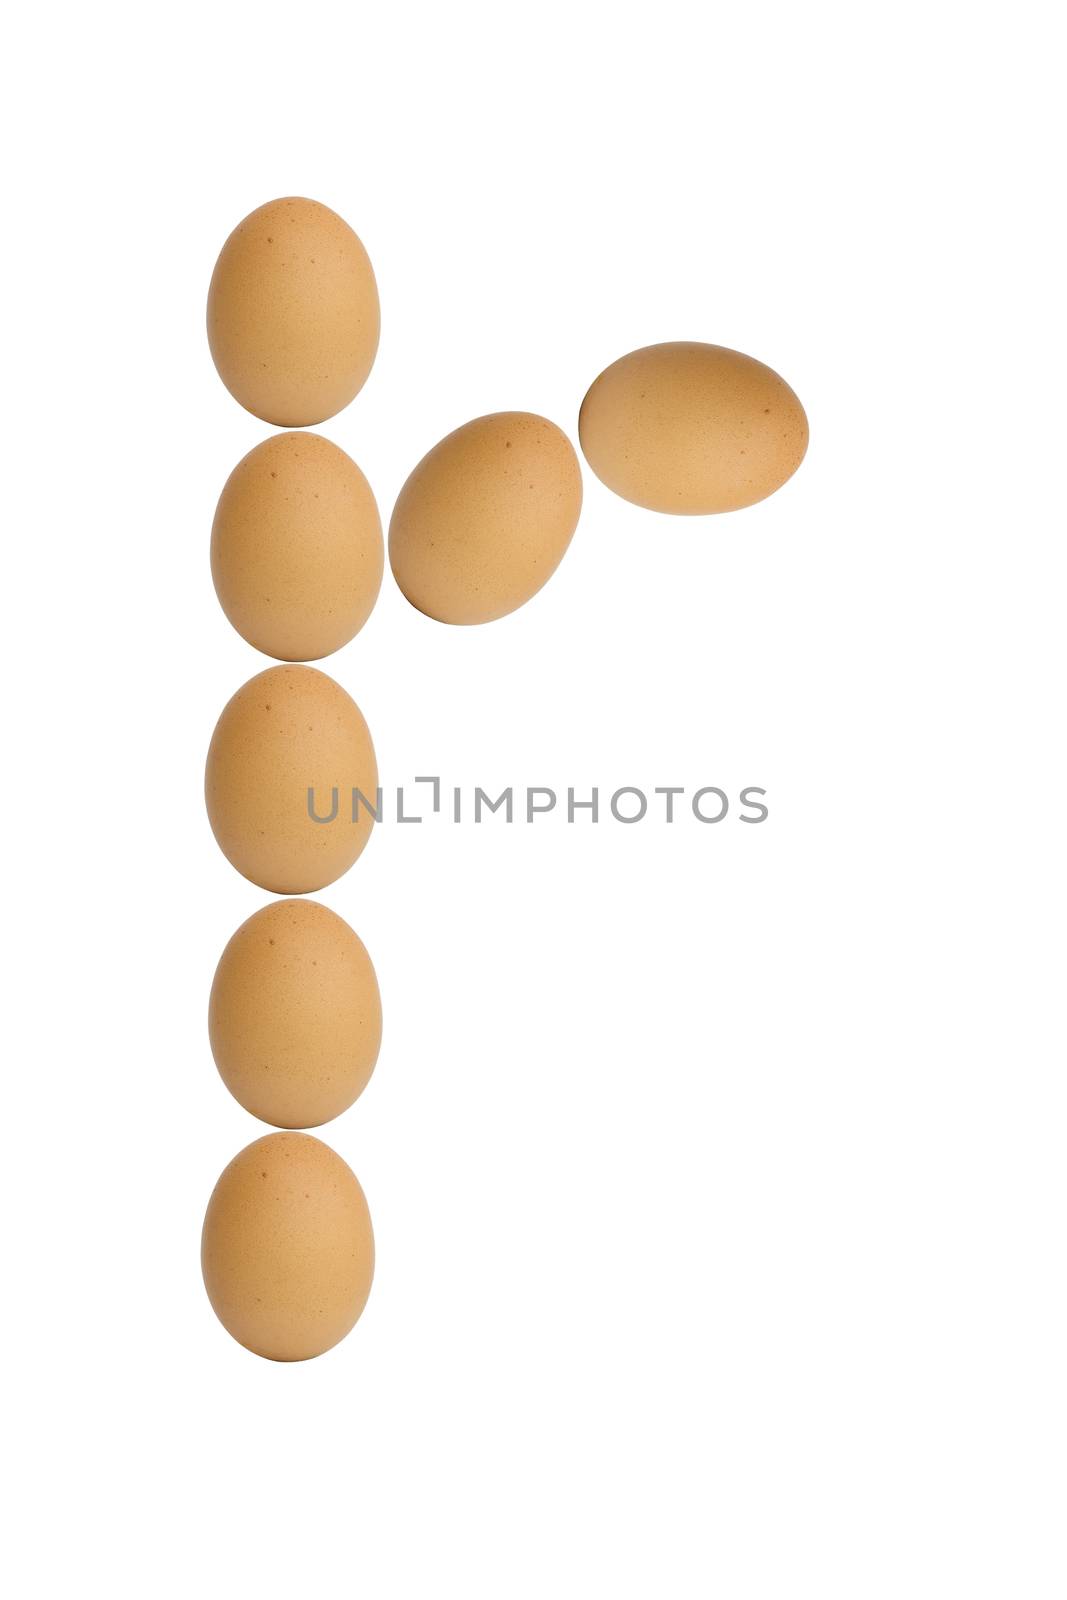 Alphabets  A to Z from brown eggs alphabet isolated on white background, r